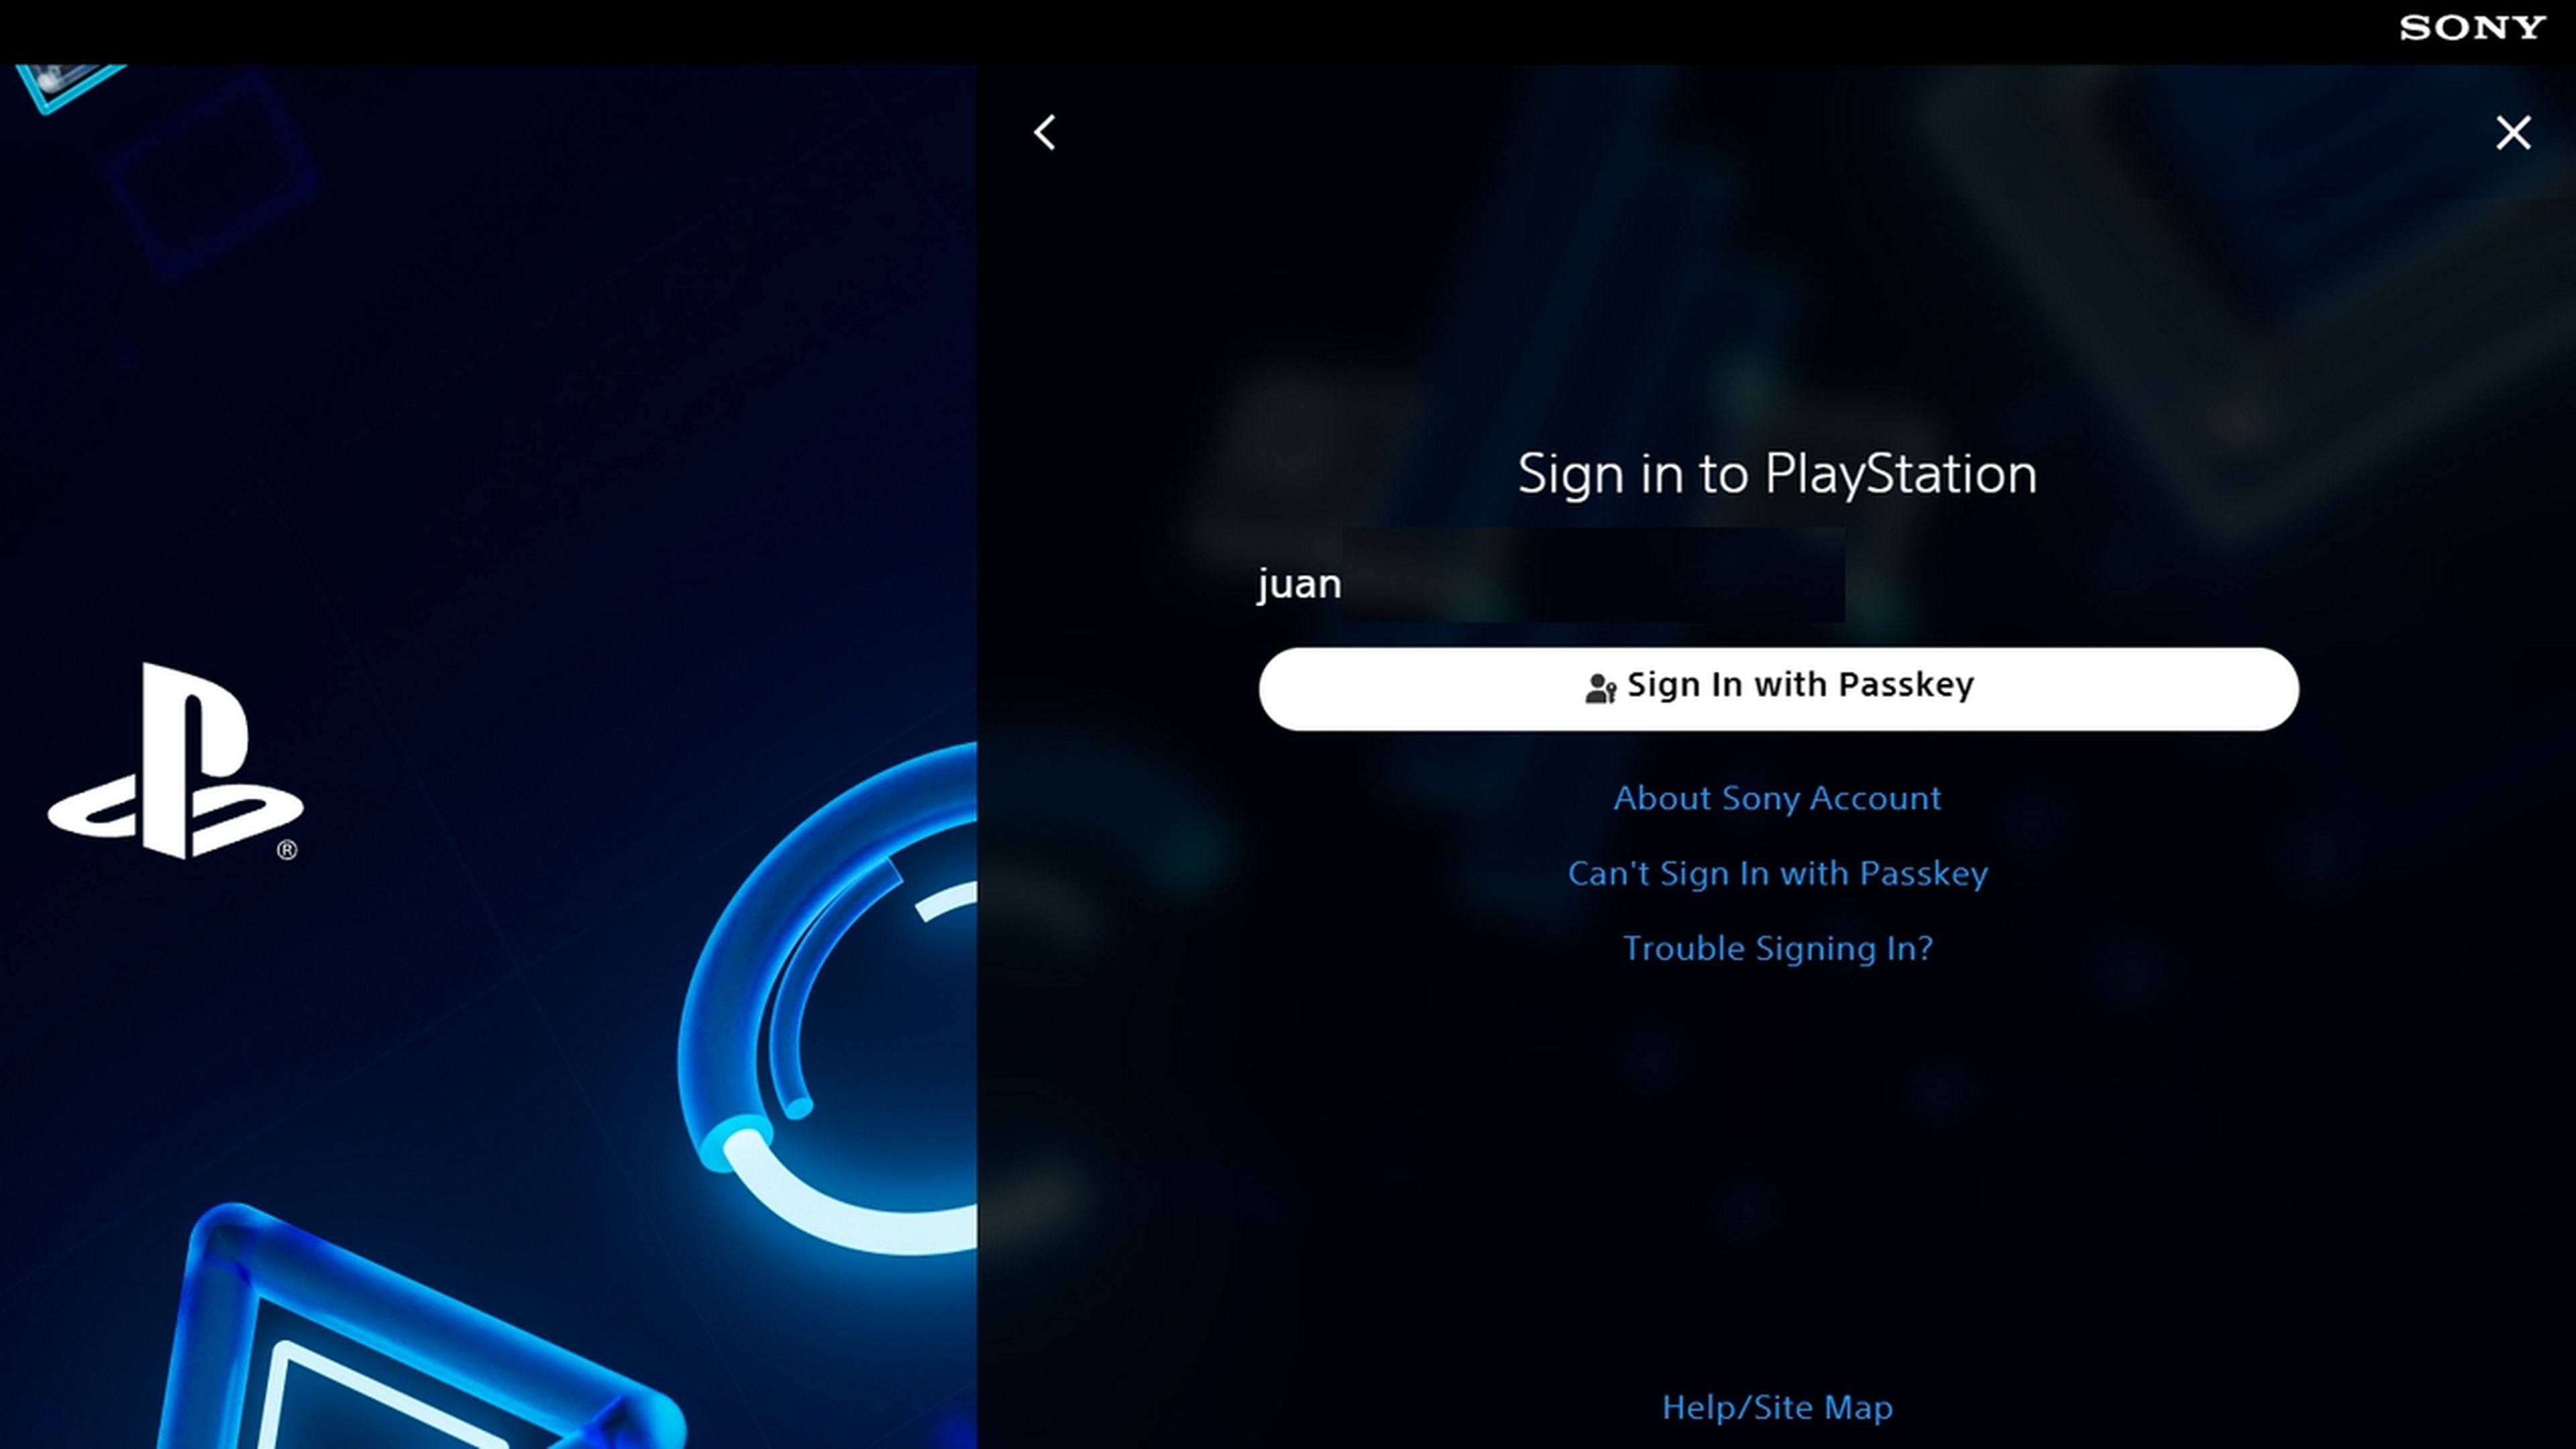 Passkey on PlayStation